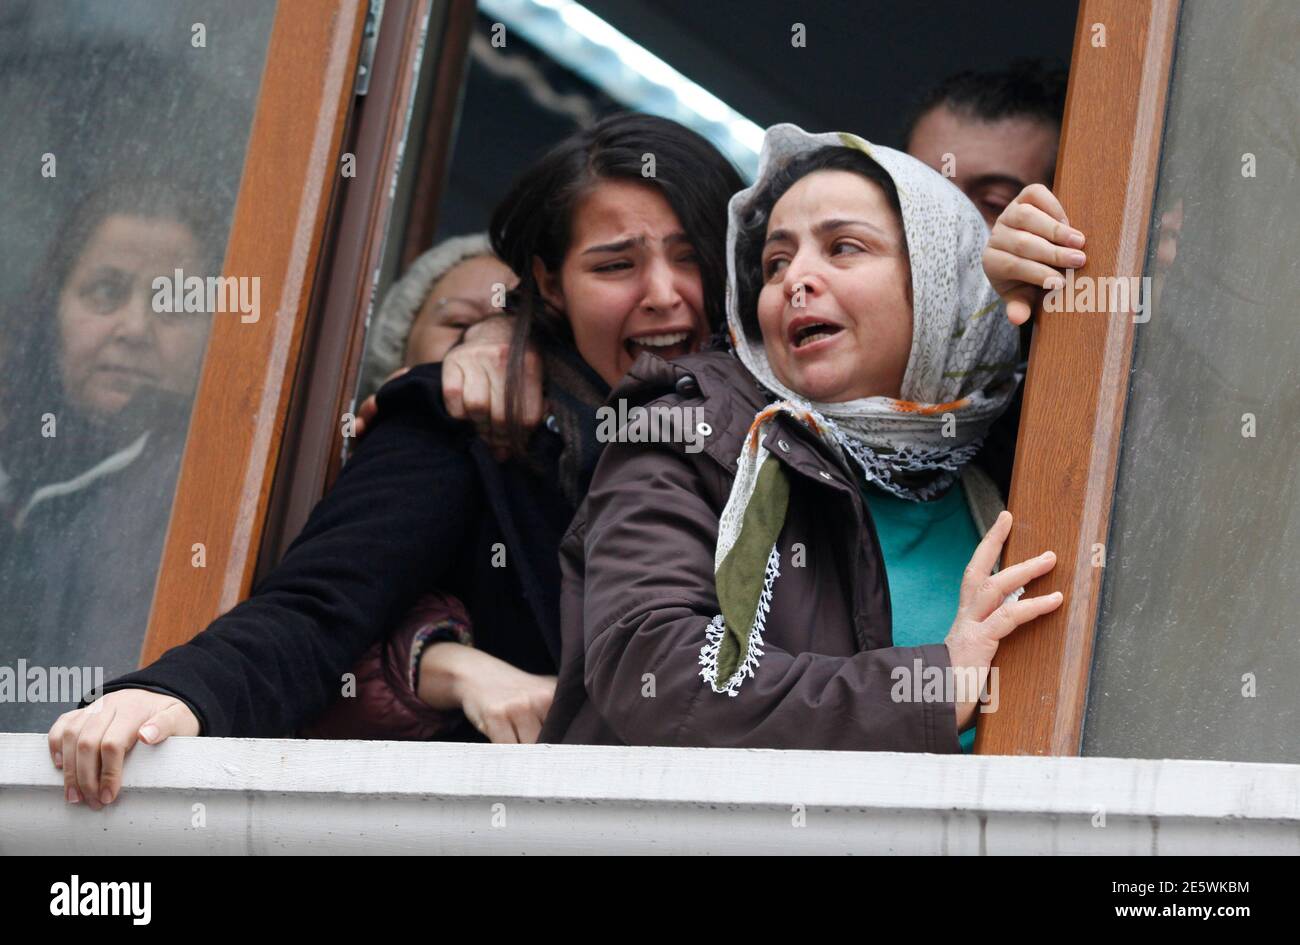 Berkin Elvan's sister Ozge (C) reacts as his coffin approaches the Okmeydani cemevi, an Alevi place of worship, in Istanbul March 11, 2014. Police and protesters clashed in Turkey's two biggest cities on Tuesday following the death of the 15-year-old boy who suffered a head injury during anti-government demonstrations last summer. Elvan, then aged 14, got caught up in street battles in Istanbul between police and protesters on June 16 after going out to buy bread for his family. He was struck in the head by a tear-gas canister and went into a coma. Alevis are a religious minority in mainly Sun Stock Photo